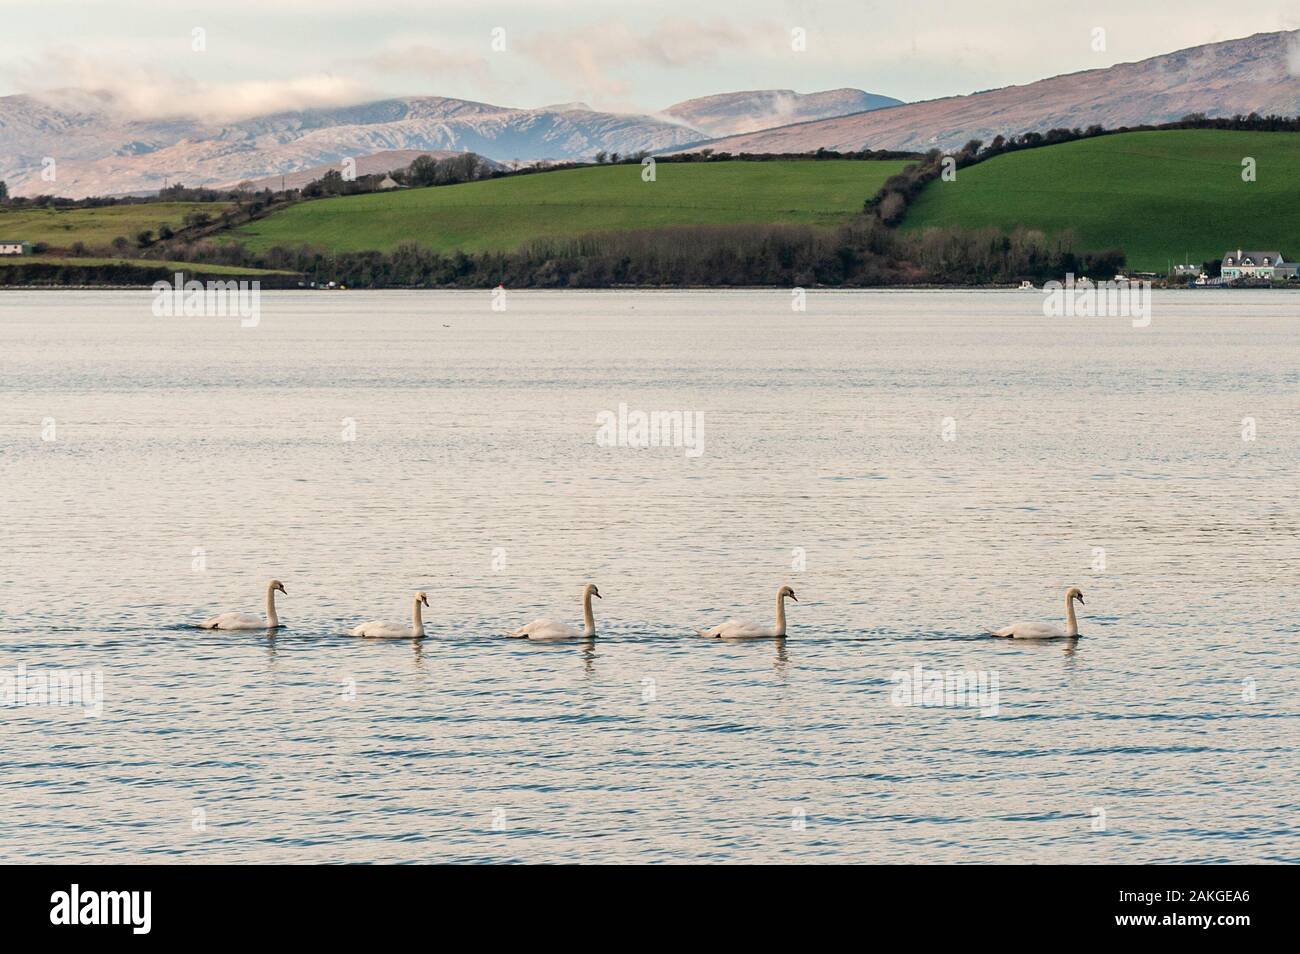 Bantry Bay, West Cork, Ireland. 9th Jan, 2020. On a beautiful, sunny winter's day, with Whiddy Island as a backdrop, 5 swans went for a swim around Bantry Bay this afternoon.  Credit: AG News/Alamy Live News. Stock Photo